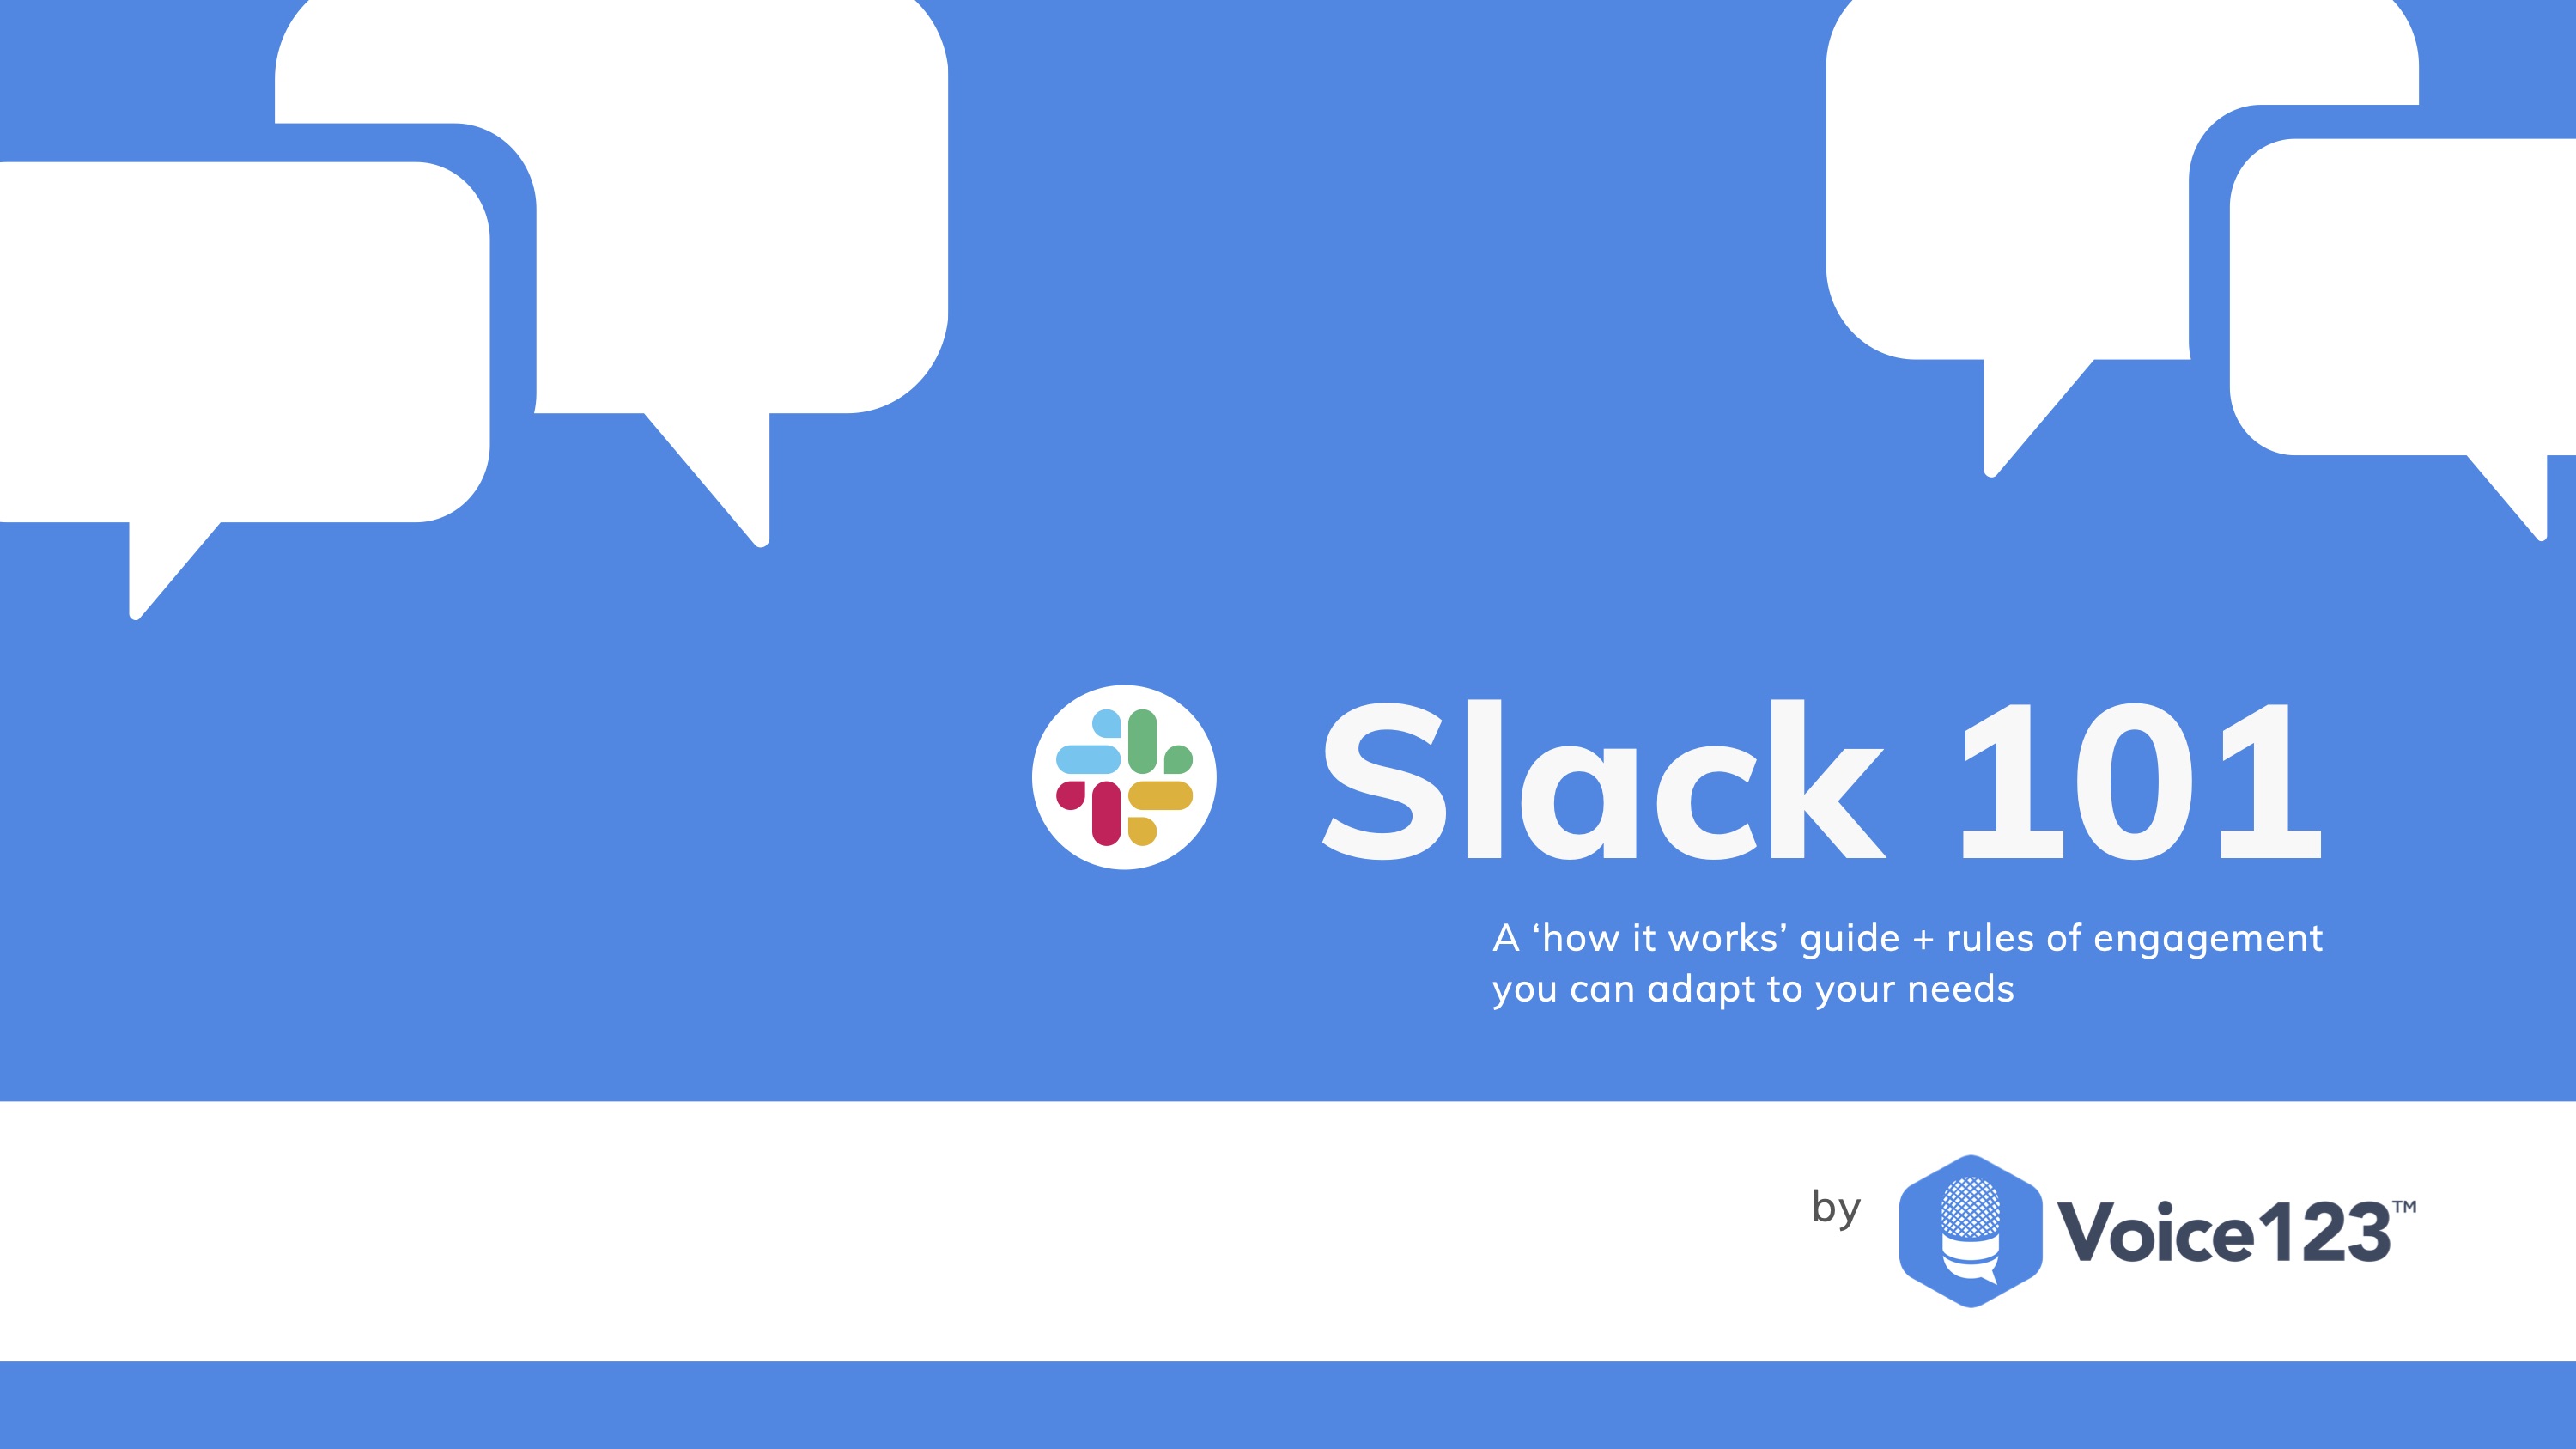 How we use Slack at Voice123